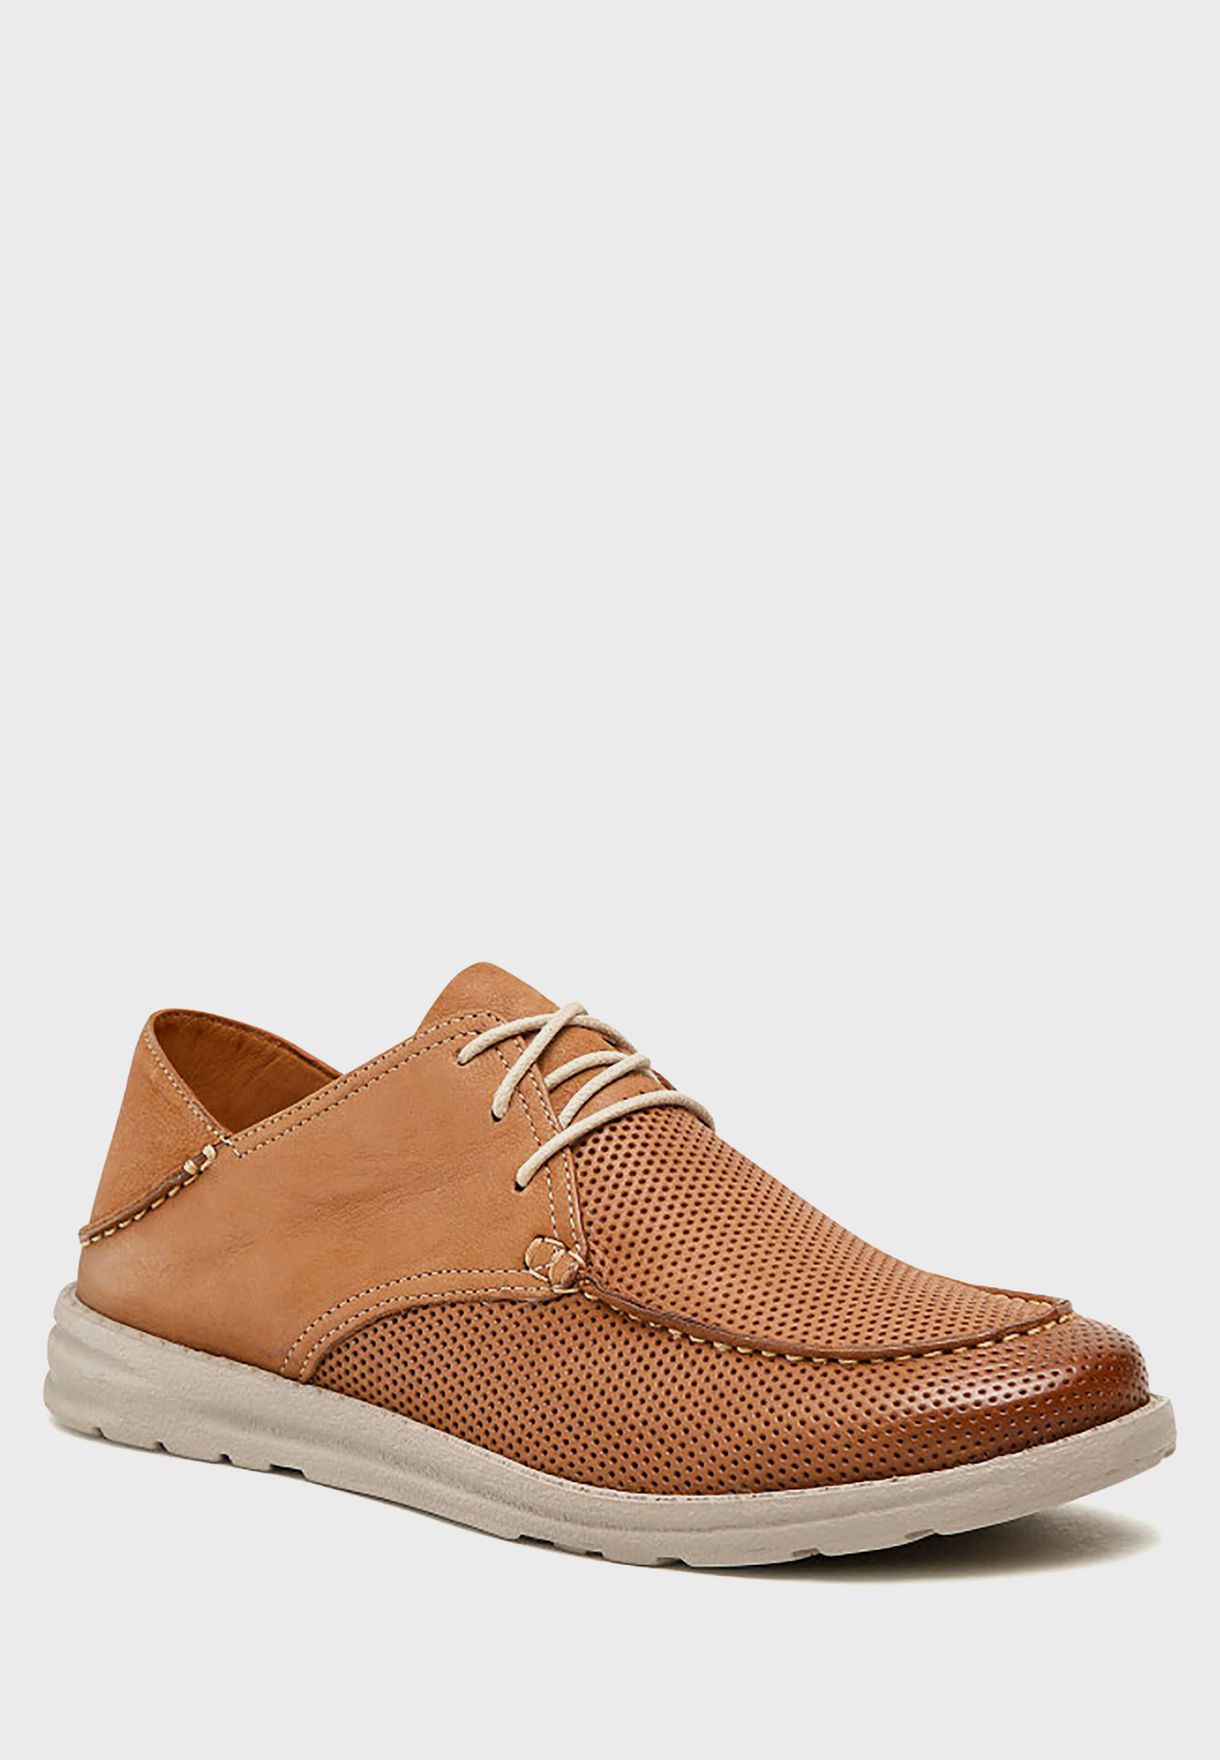 Perforated Lace Ups